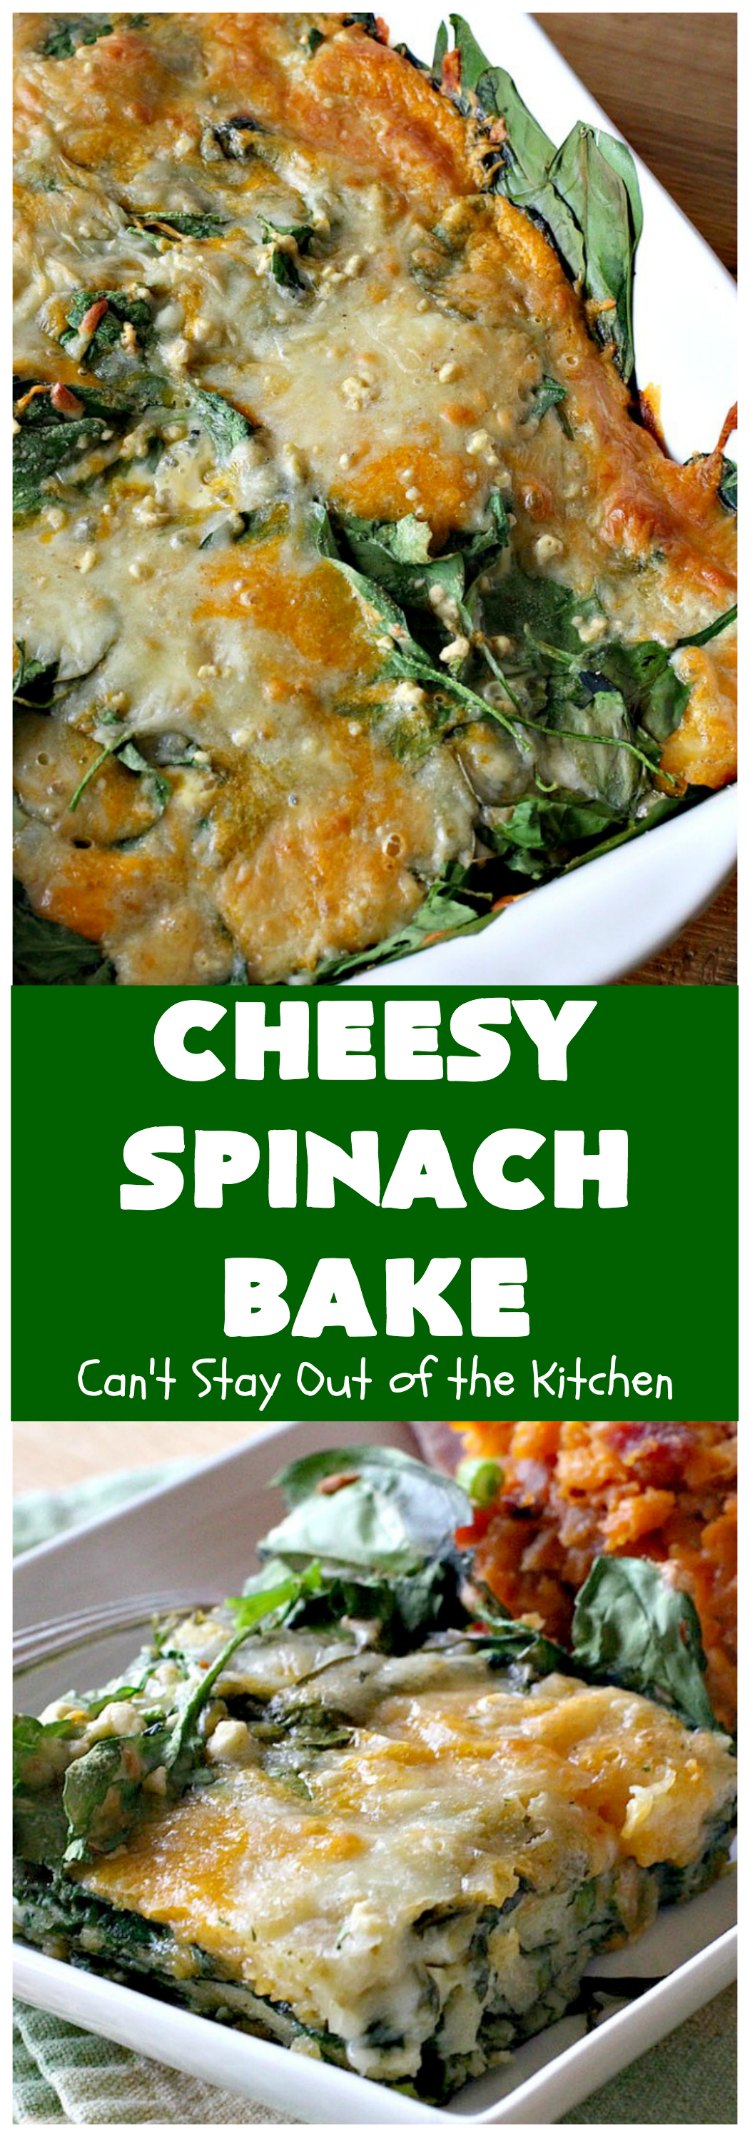 Cheesy Spinach Bake | Can't Stay Out of the Kitchen | this cheesy & delicious #spinach #souffle is made with both #CheddarCheese &  #MontereyJack. It's the ultimate in cheesy comfort food! It's terrific for #holiday menus like #Thanksgiving or #Christmas. #GlutenFree #SideDish #GlutenFreeSideDish #CheesySpinachBake